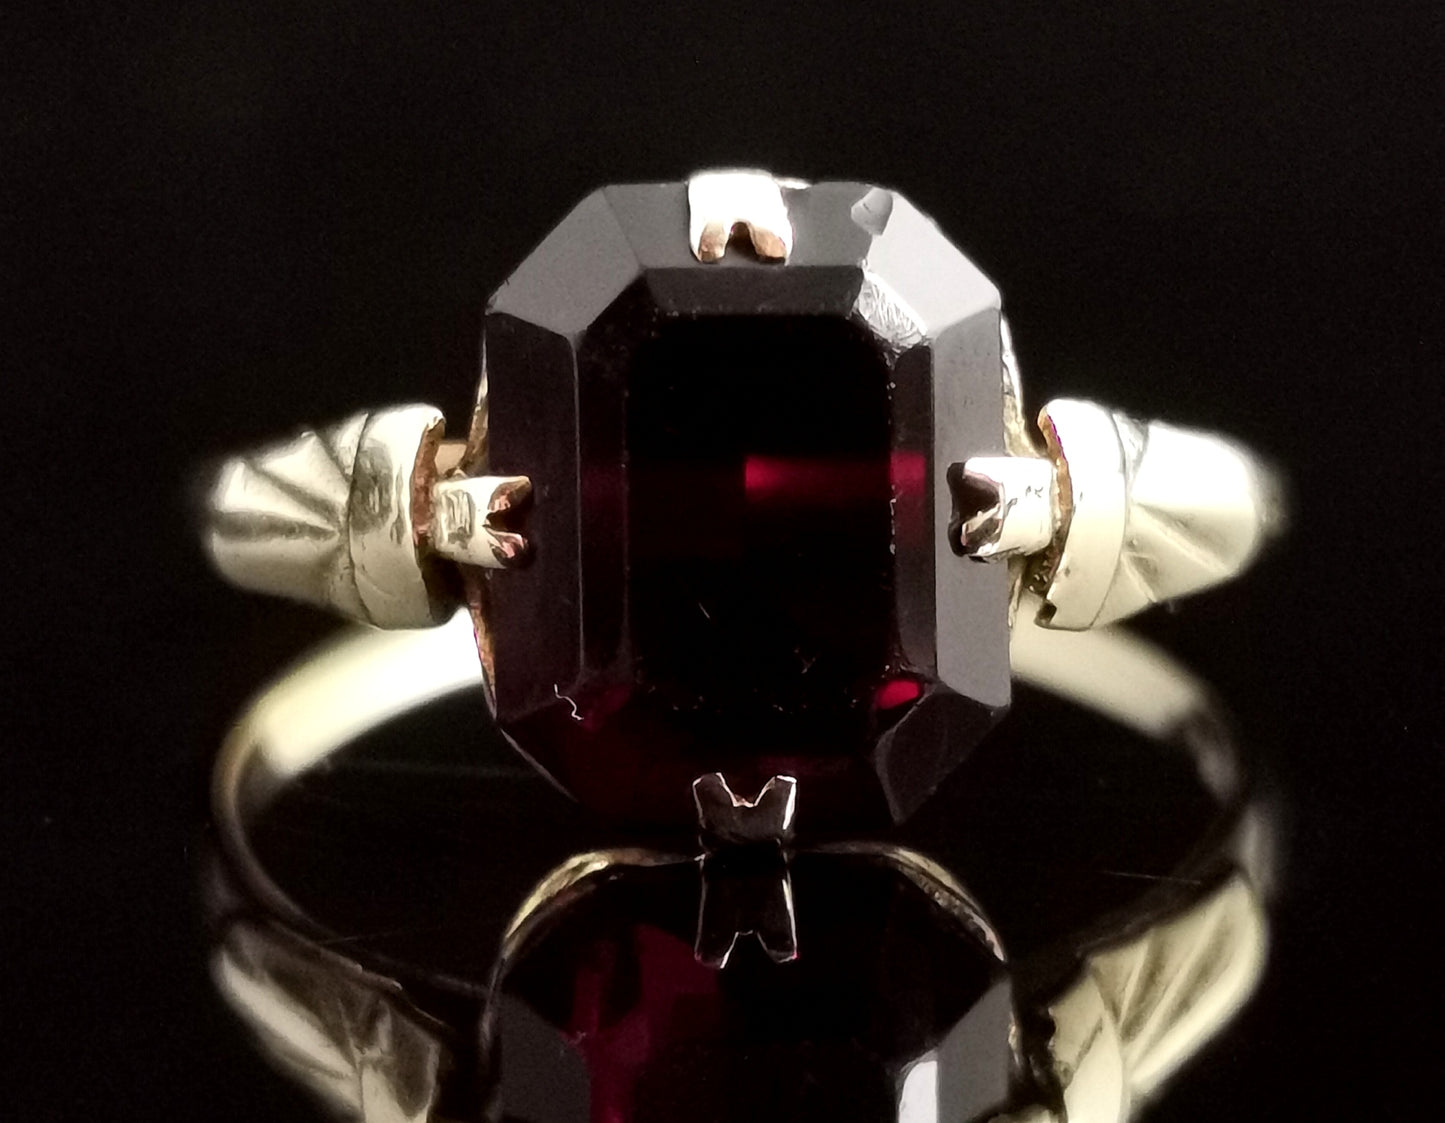 Vintage 9ct gold Garnet solitaire ring, cocktail ring